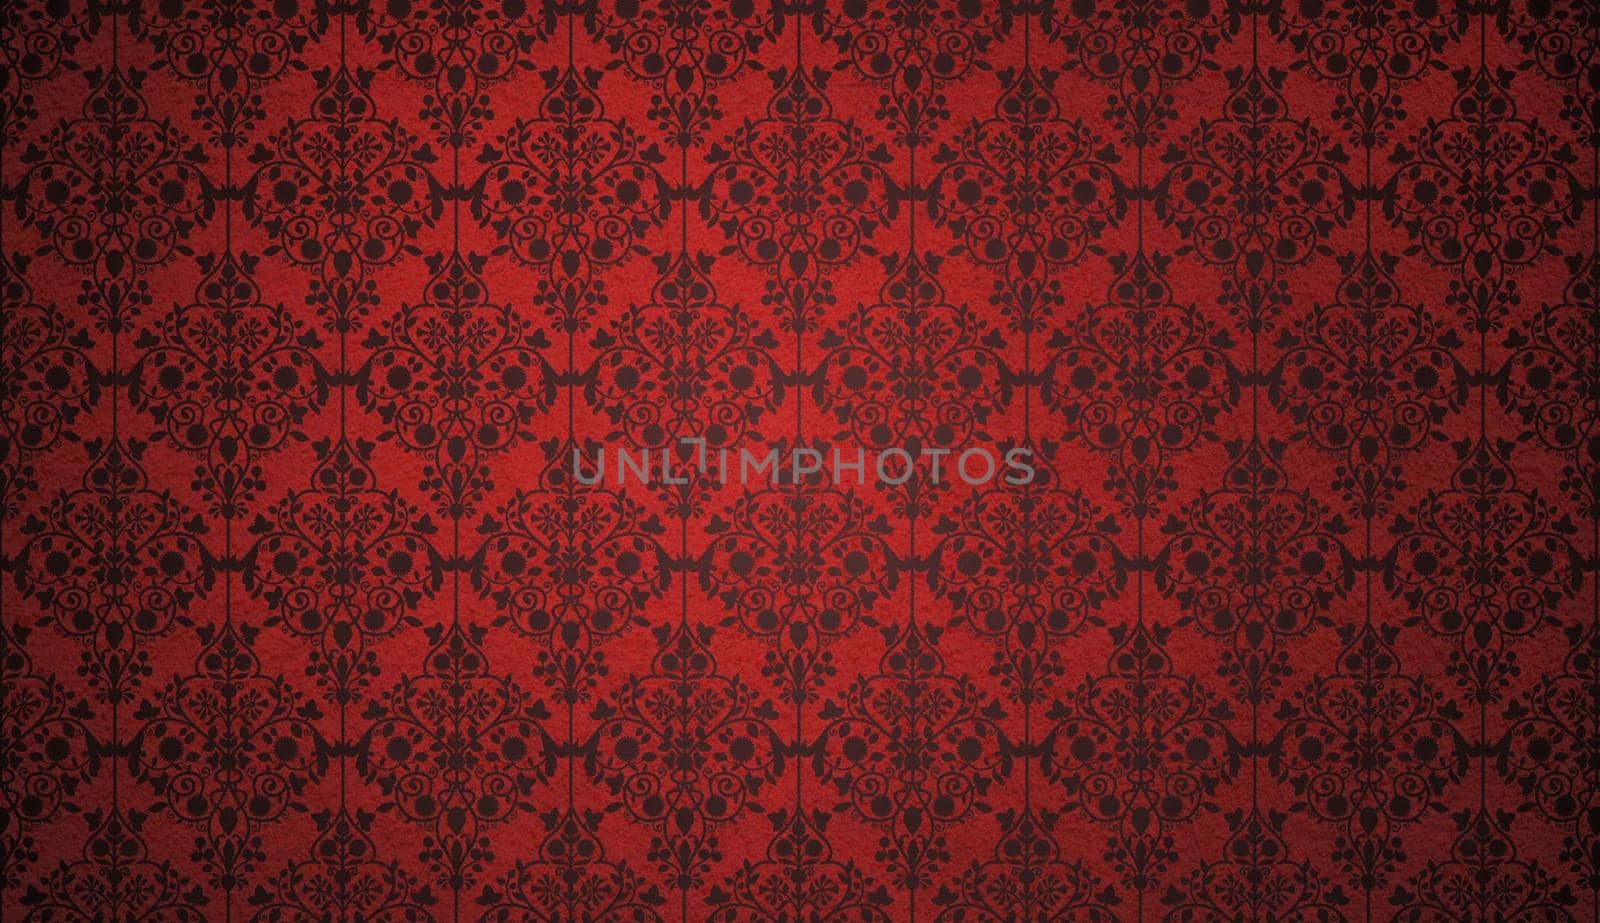 Backgrounds, design for wrappers, wallpapers, postcards